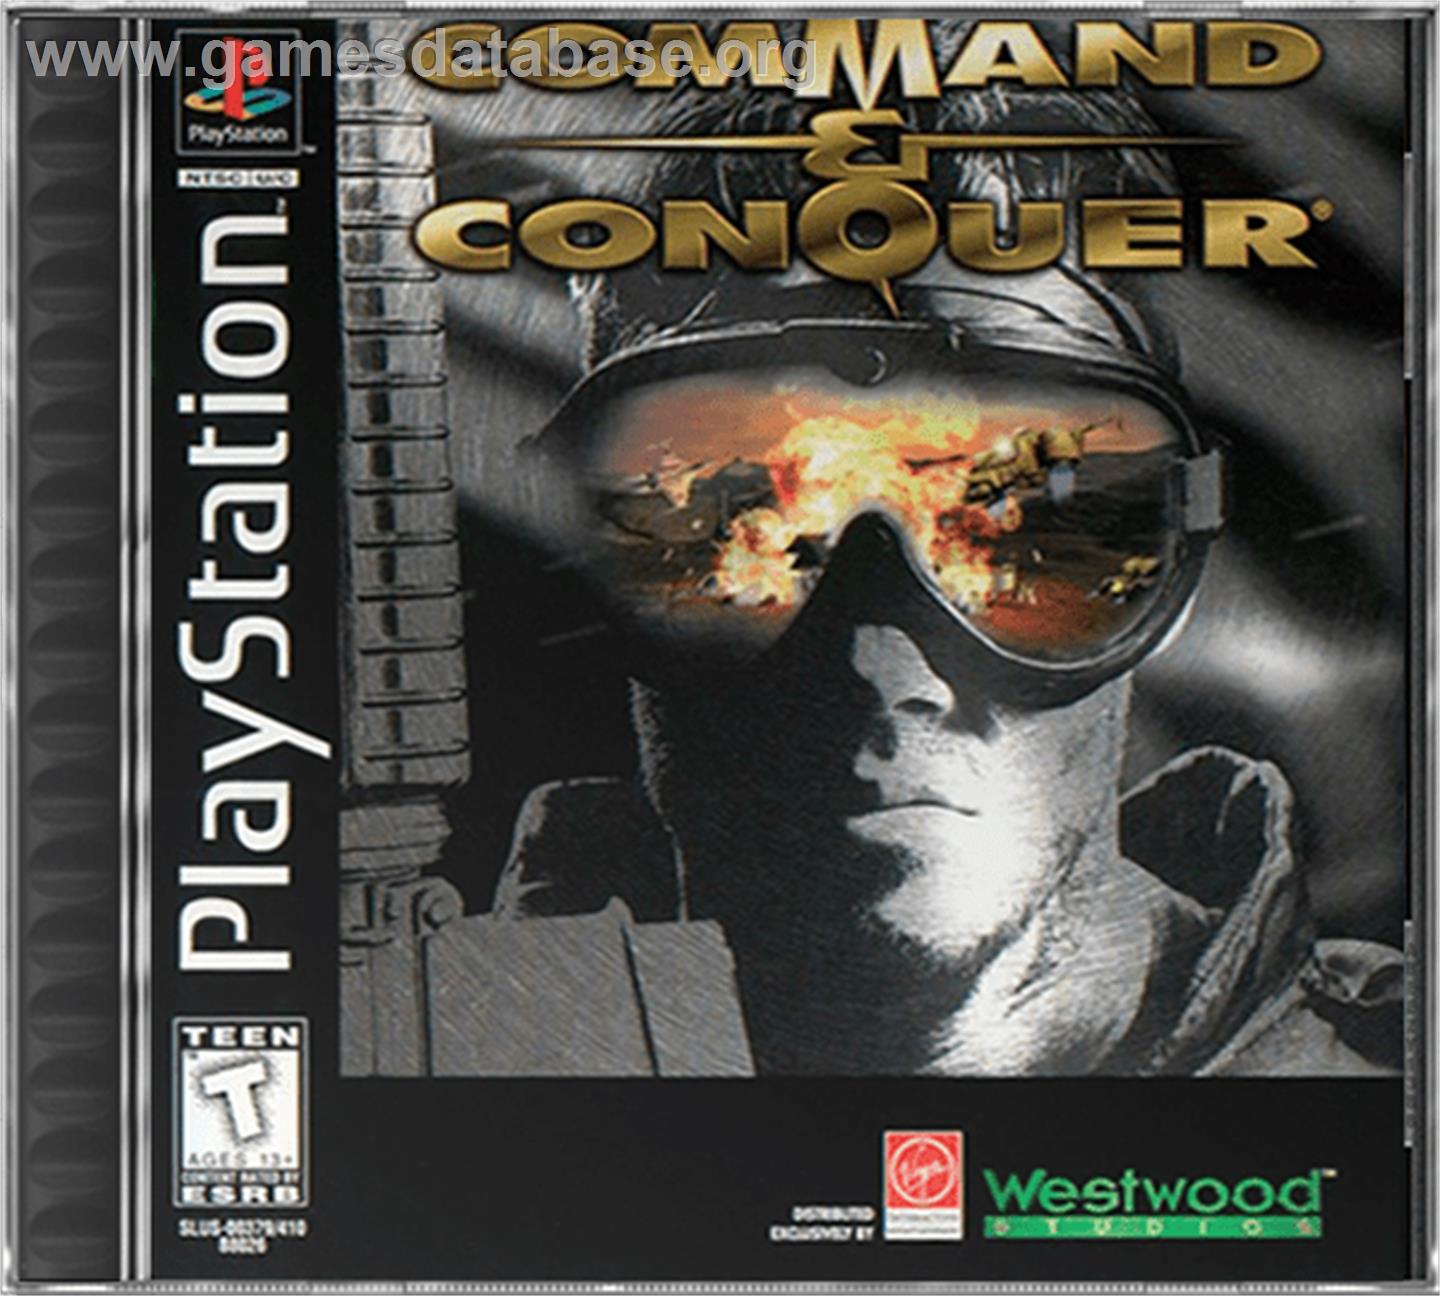 Command & Conquer: Red Alert - Sony Playstation - Artwork - Box